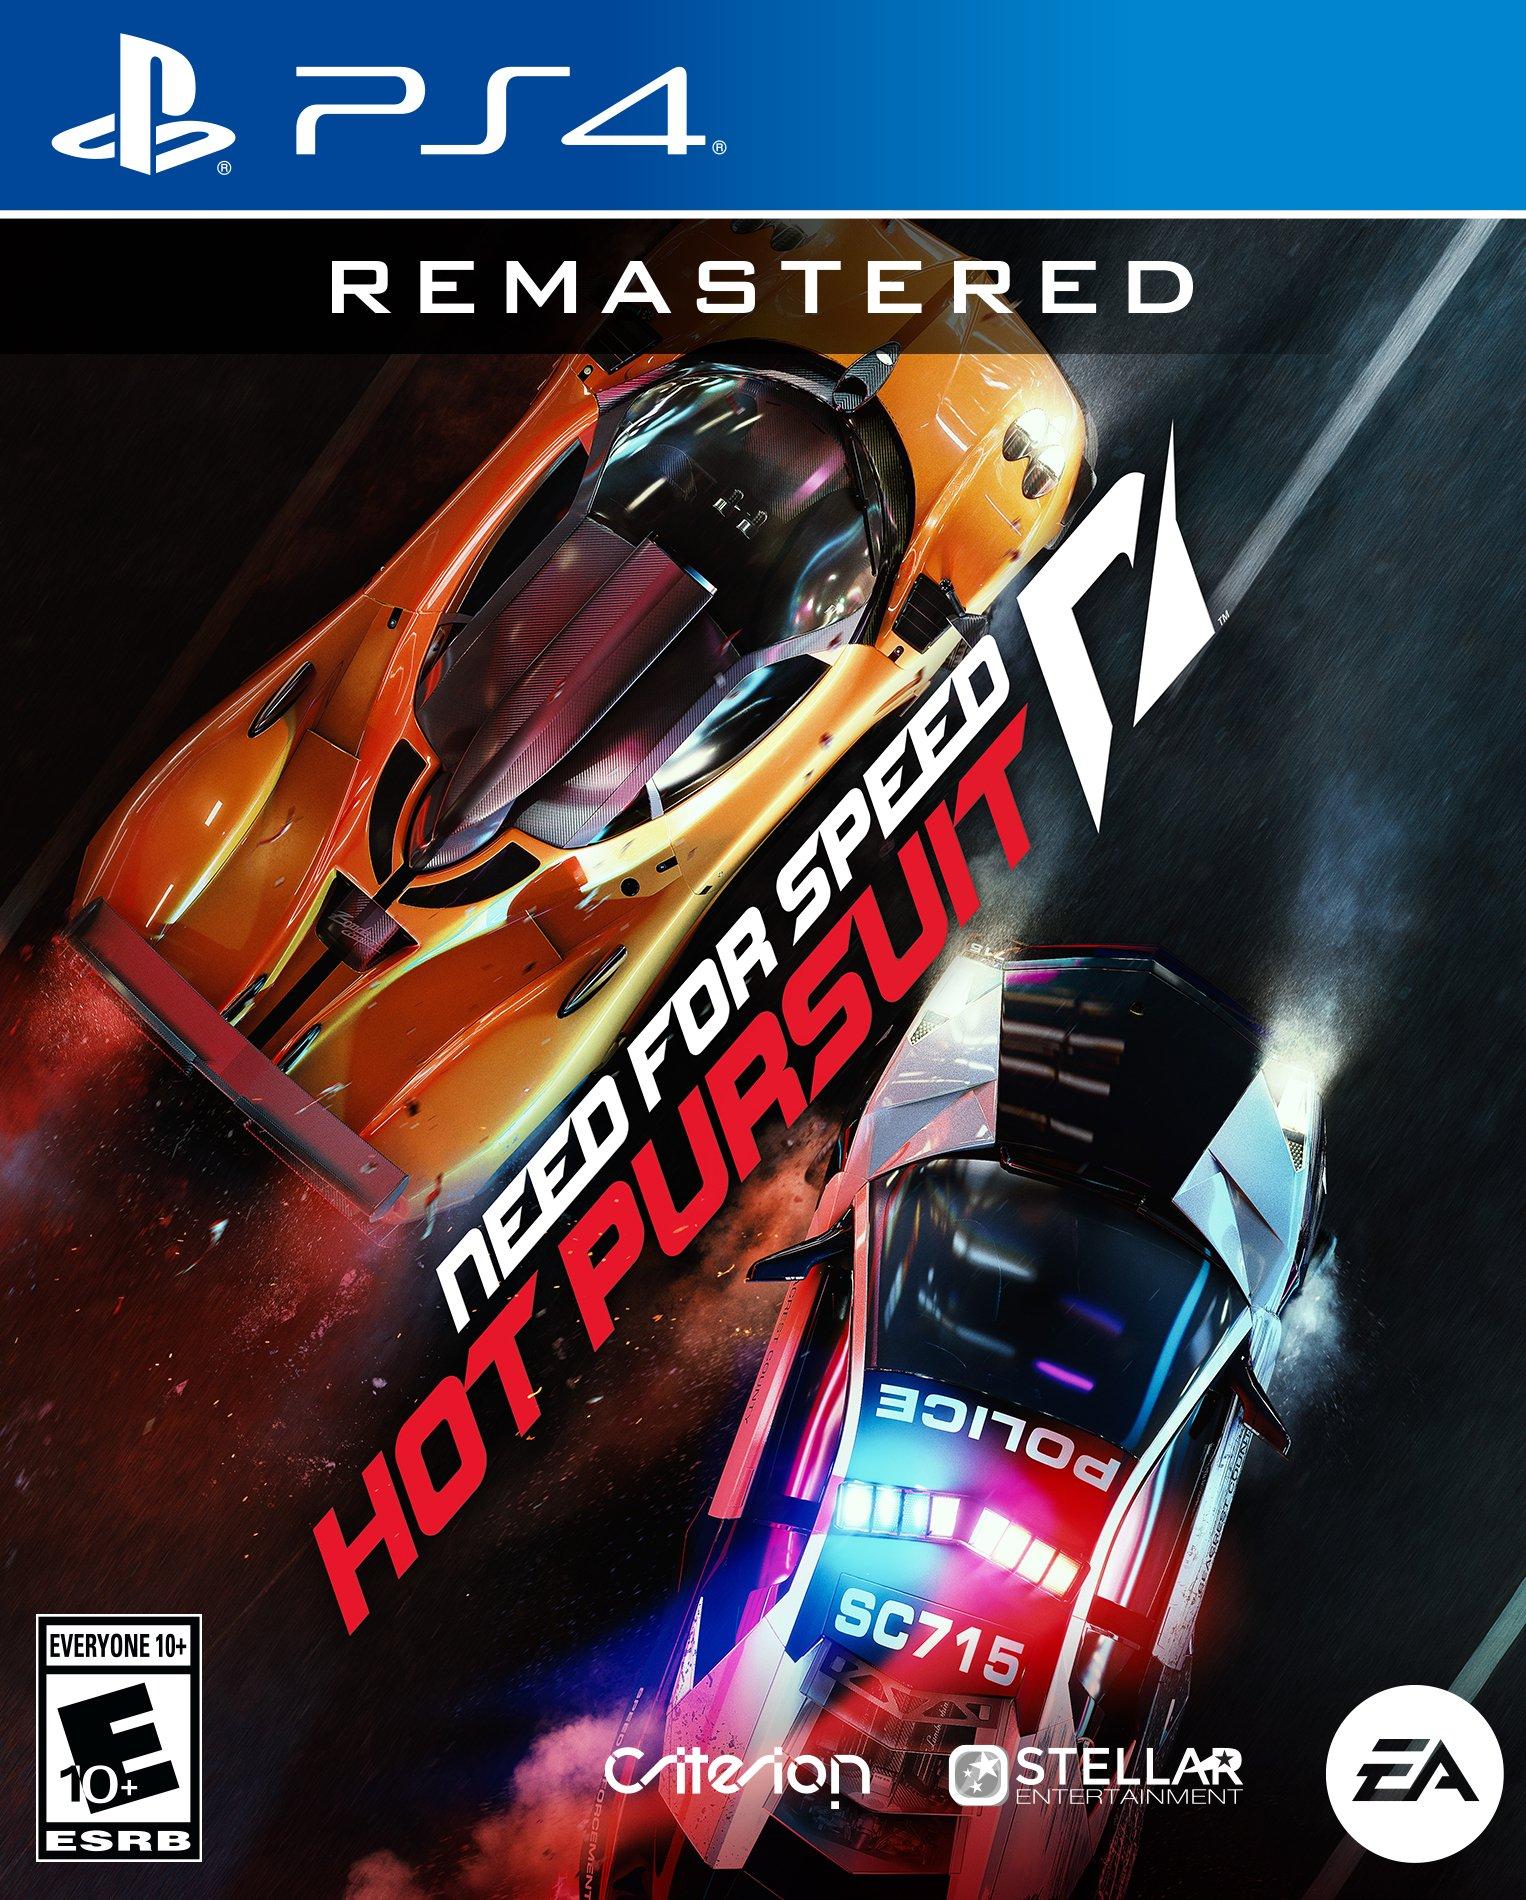  Need for Speed - PlayStation 4 : Electronic Arts: Video Games